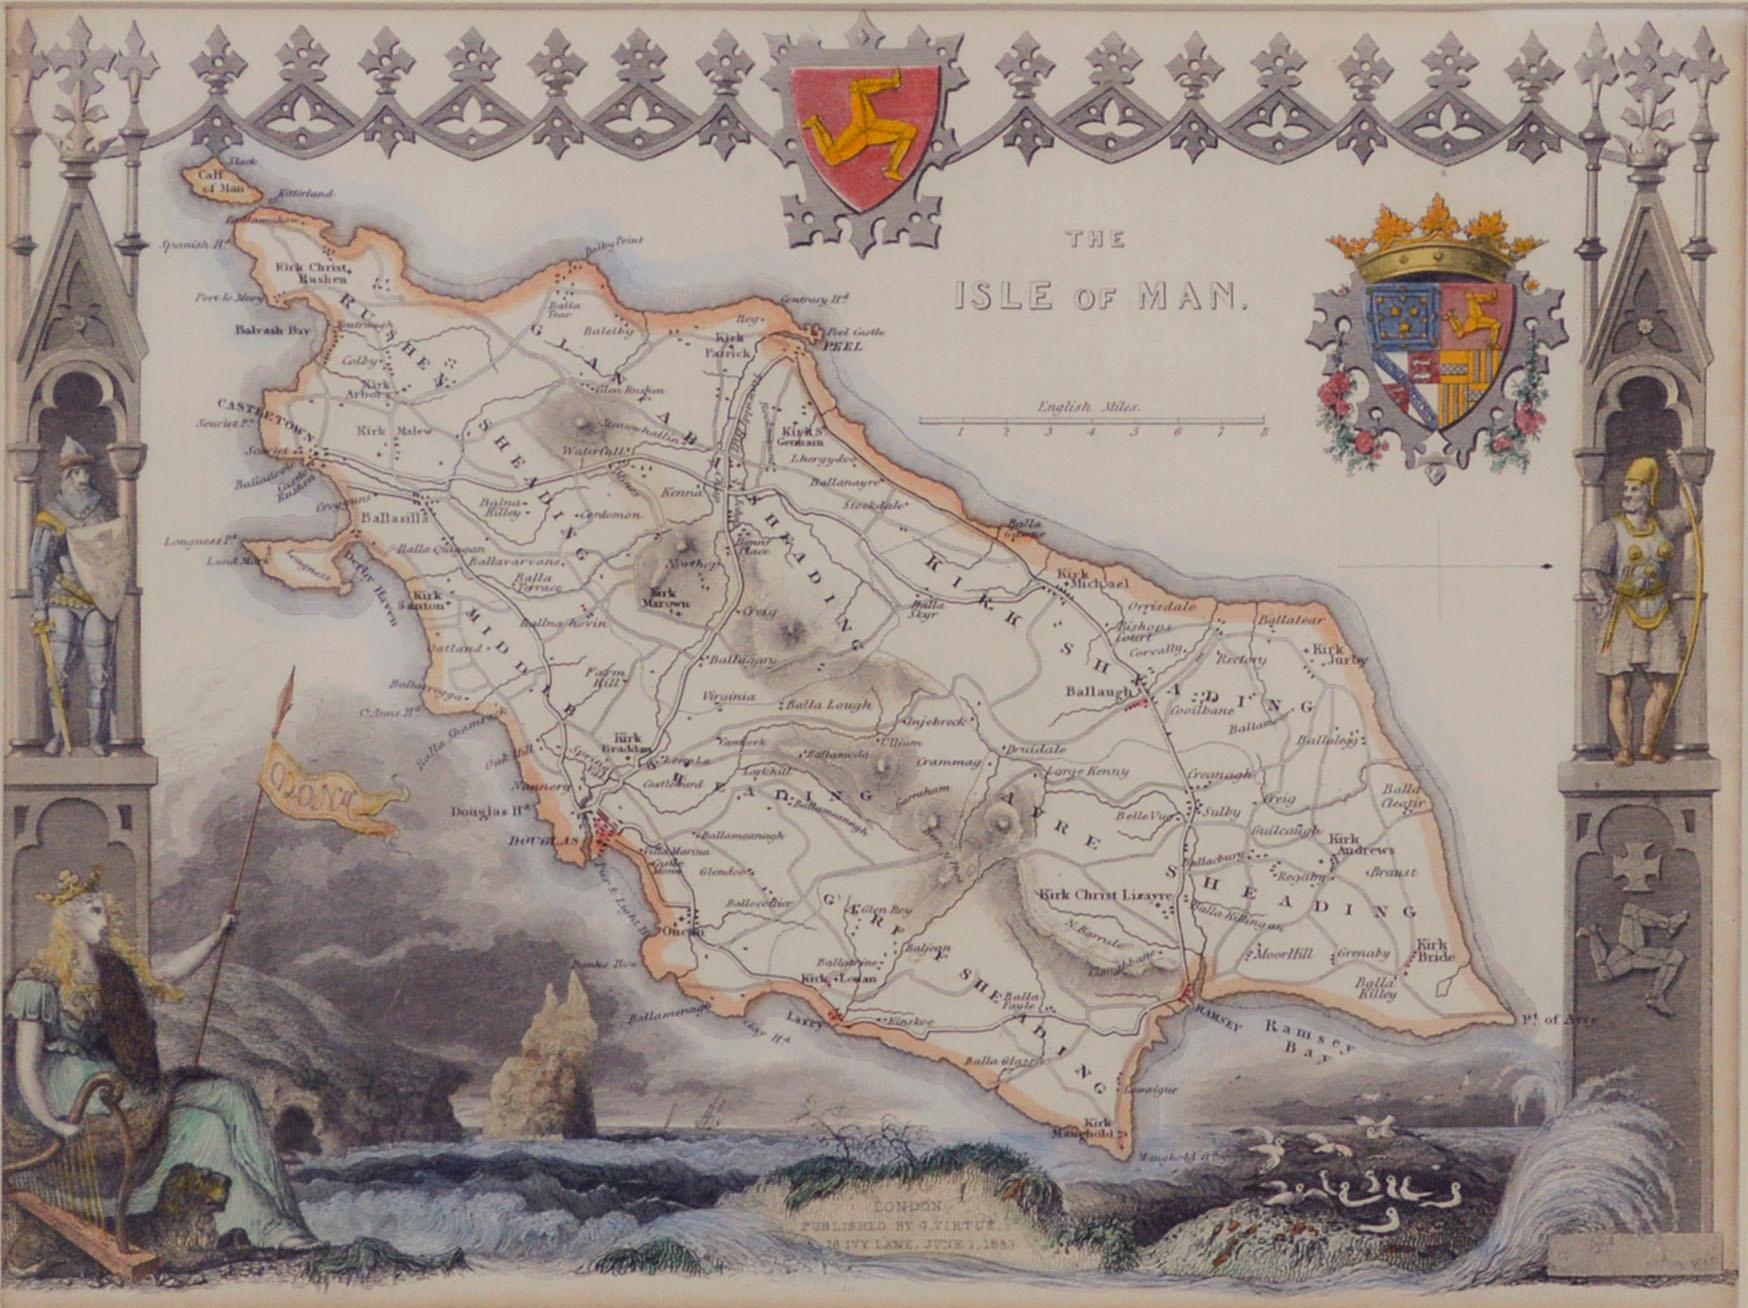 19th Century The Isle of Man - Print by Thomas Moule